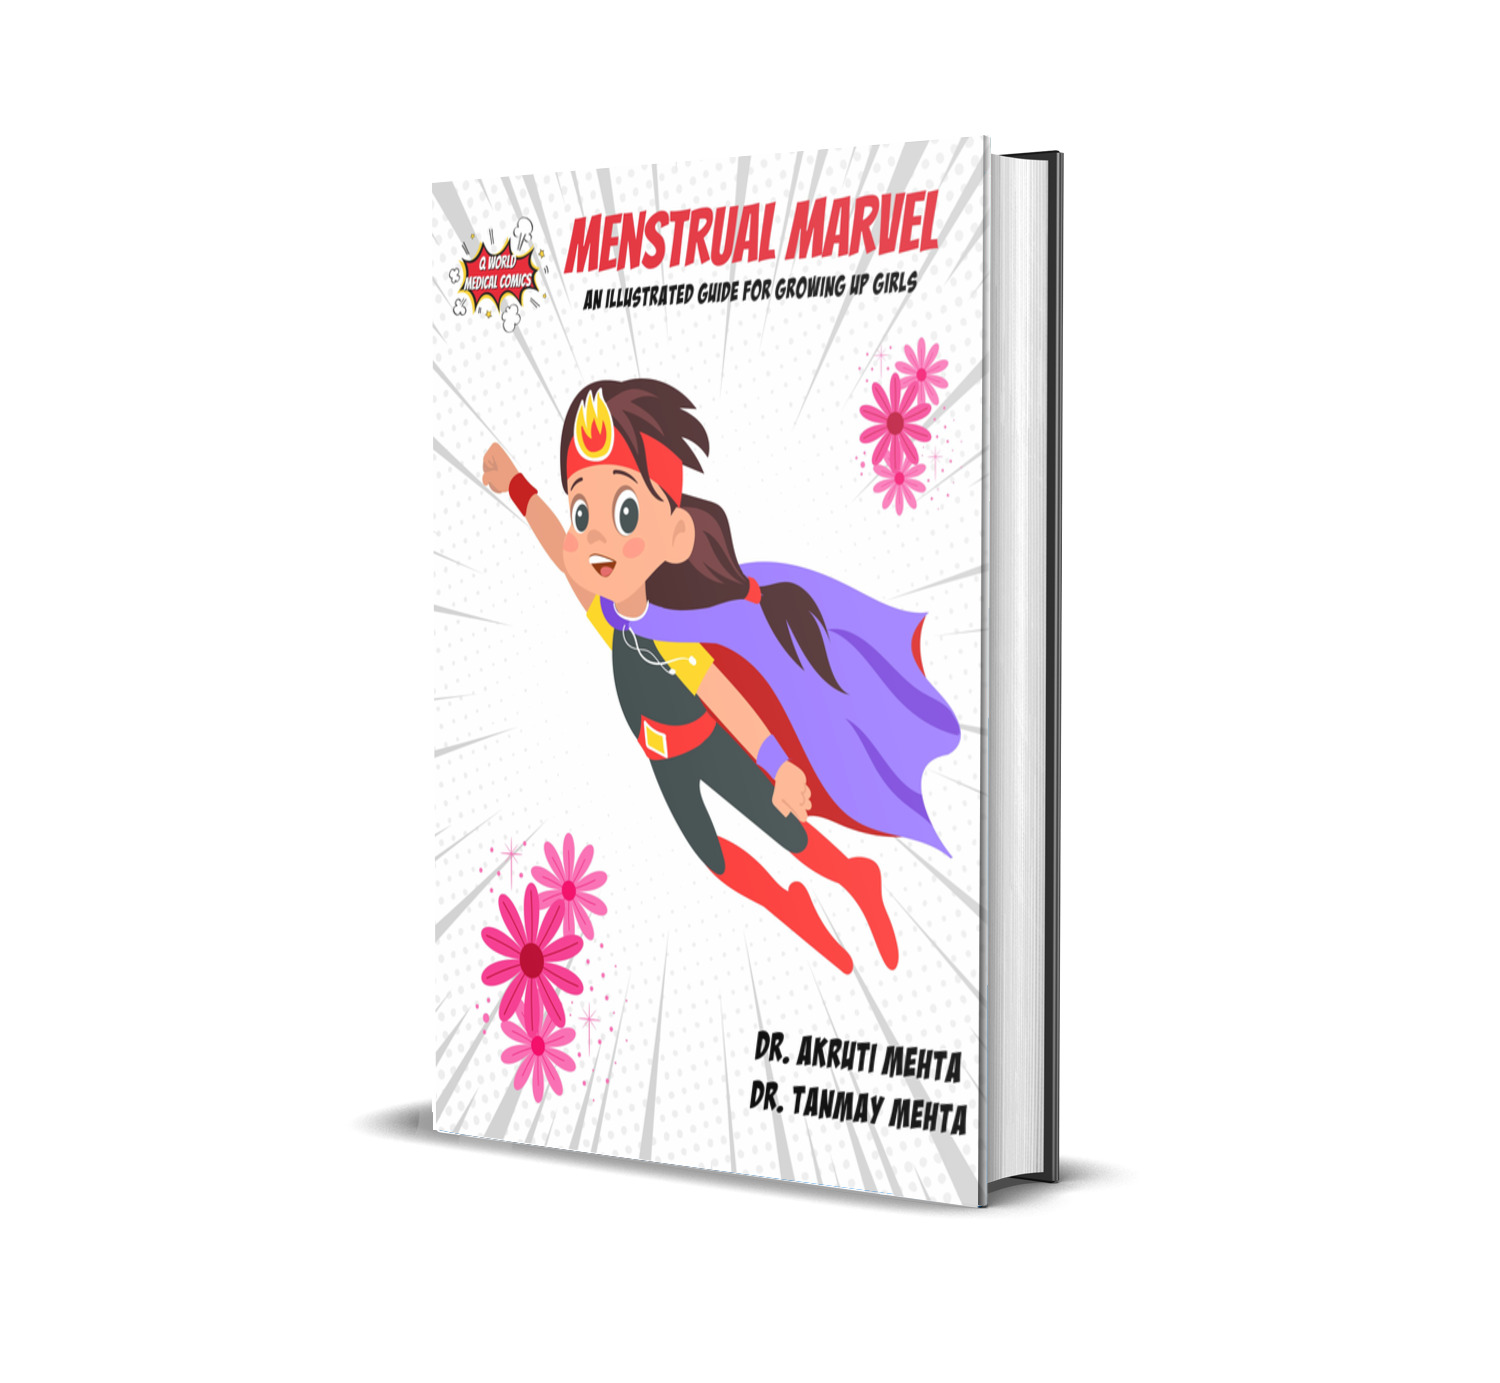 Menstrual Marvel: An illustrated guide for growing up girls